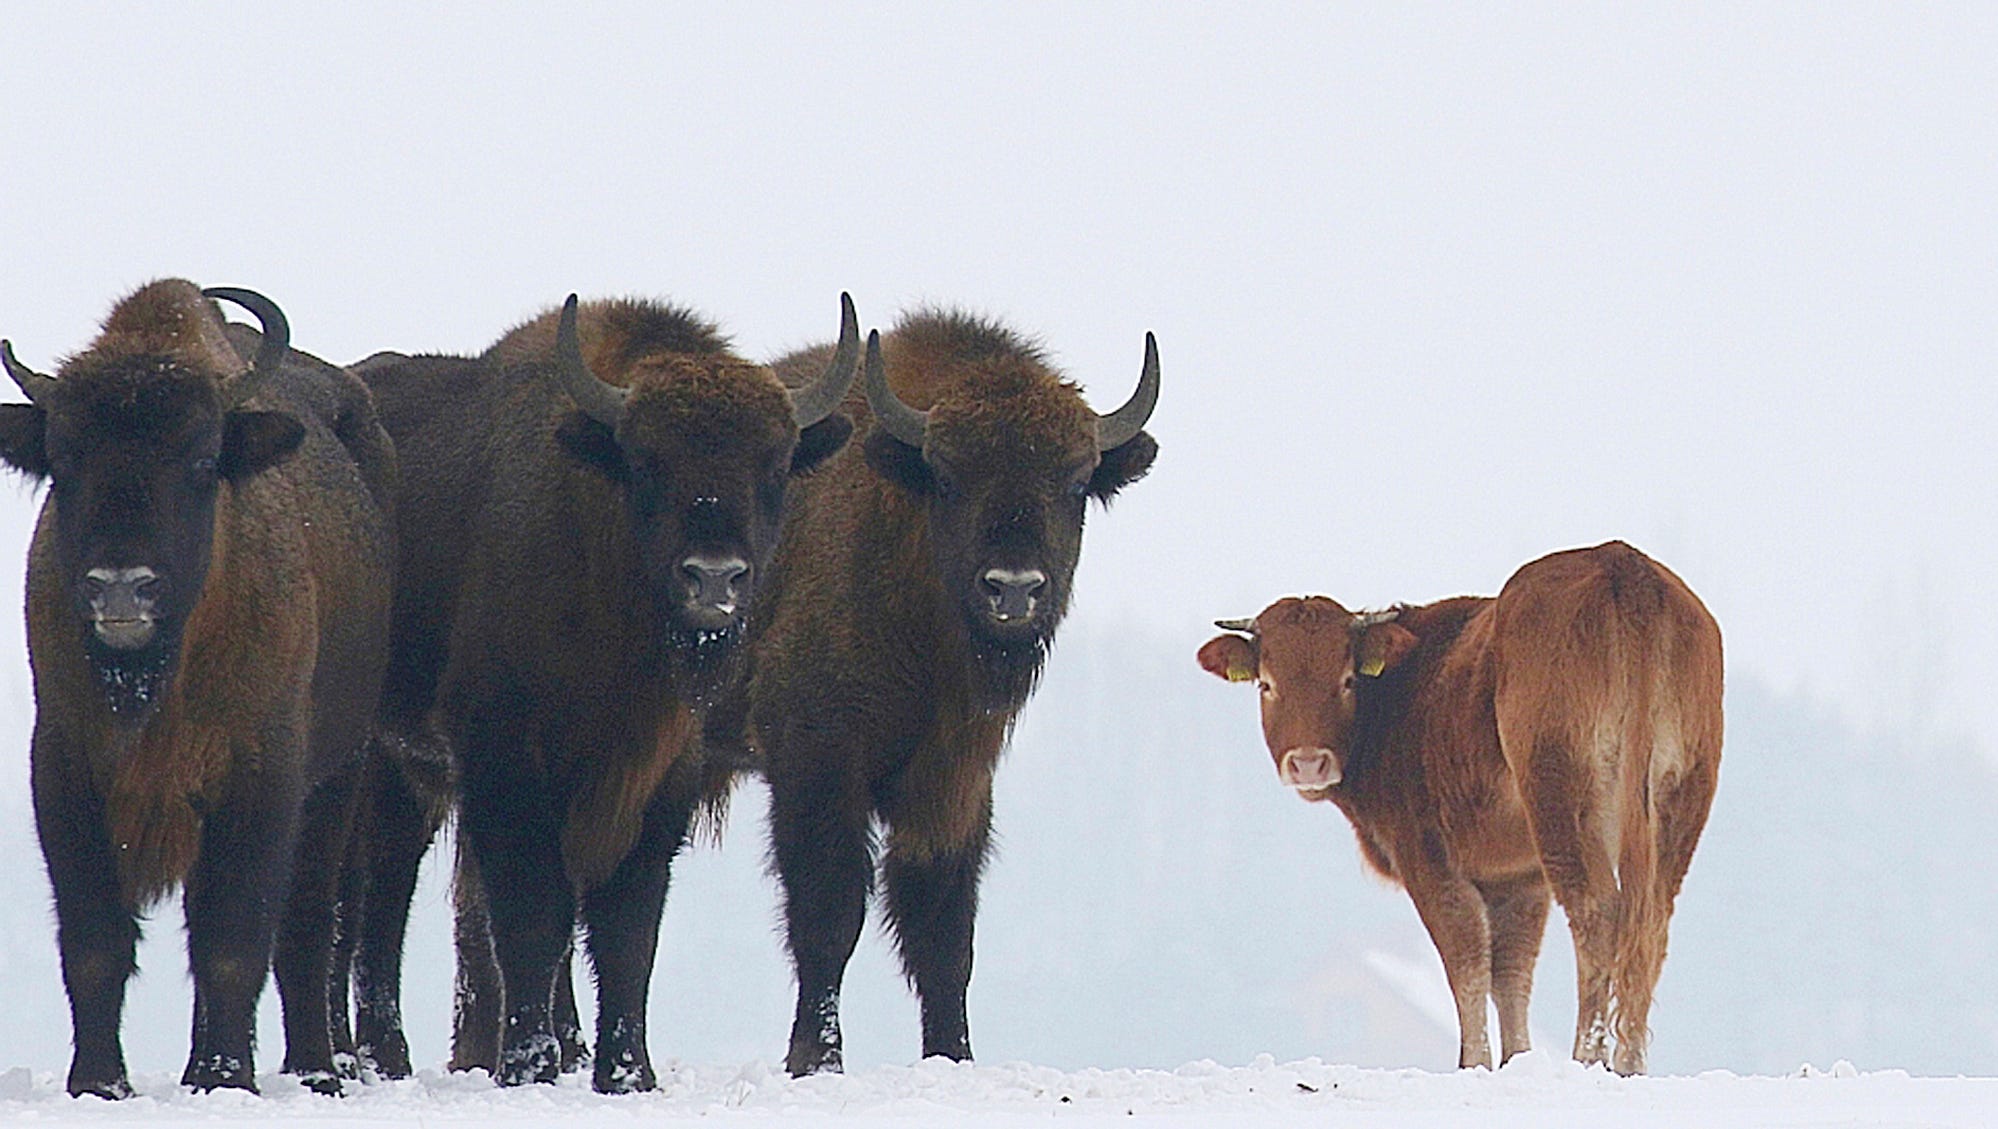 A farmyard cow in Poland has chosen freedom this winter, roaming with a bison herd for three months after escaping its pen.